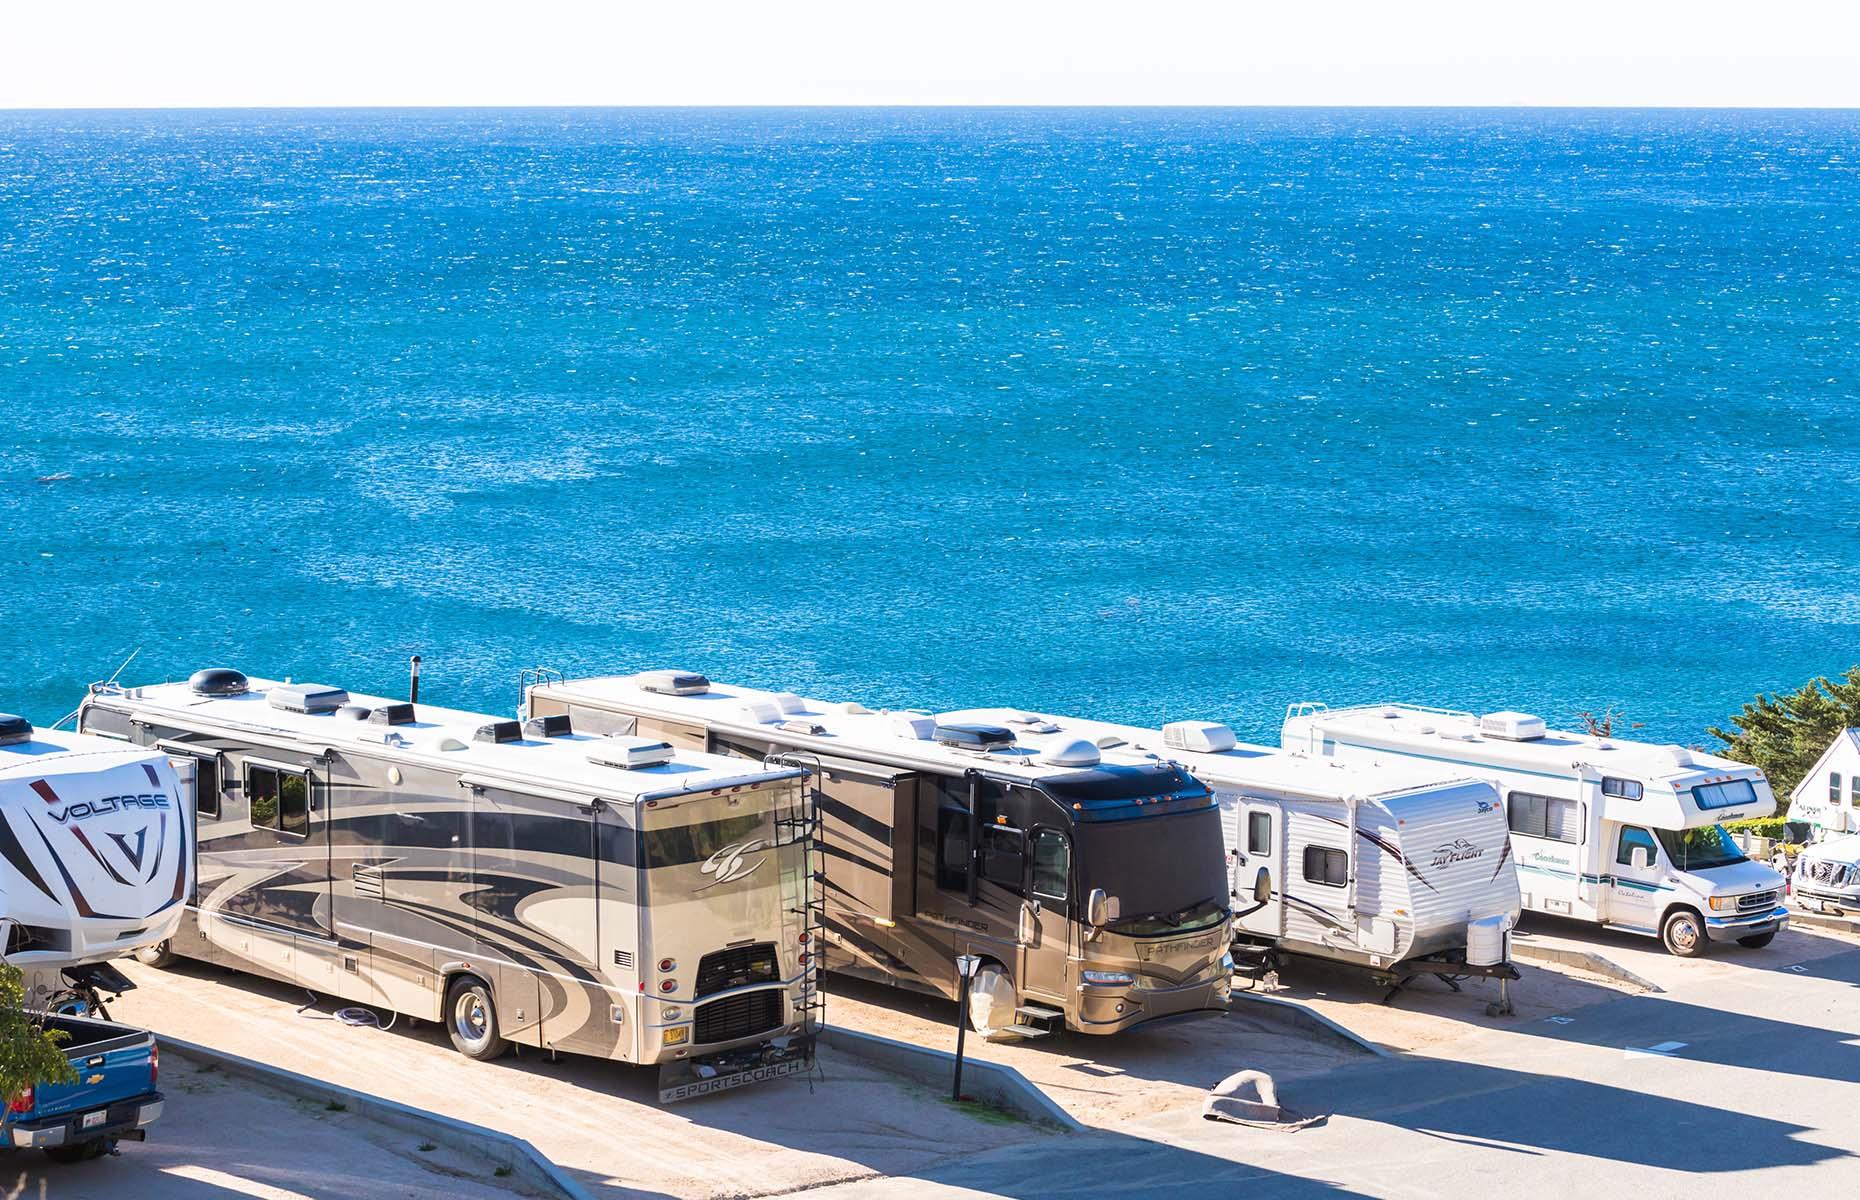 <p>By the 2010s, the RV – by now an American institution – was not just used during vacation time. The term 'digital nomading' (typically meaning remote workers who travel around freely, often in a camper van or RV) was first used in 1997. But it wasn't until this decade that it would really catch on. <a href="https://www.forbes.com/sites/elainepofeldt/2018/08/30/digital-nomadism-goes-mainstream/?sh=76daf664553c">According to research by MBO Partners</a>, some 4.8 million Americans dubbed themselves 'digital nomads' by 2018. This 2014 photo captures a series of large RVs on the coast in Malibu, California.</p>